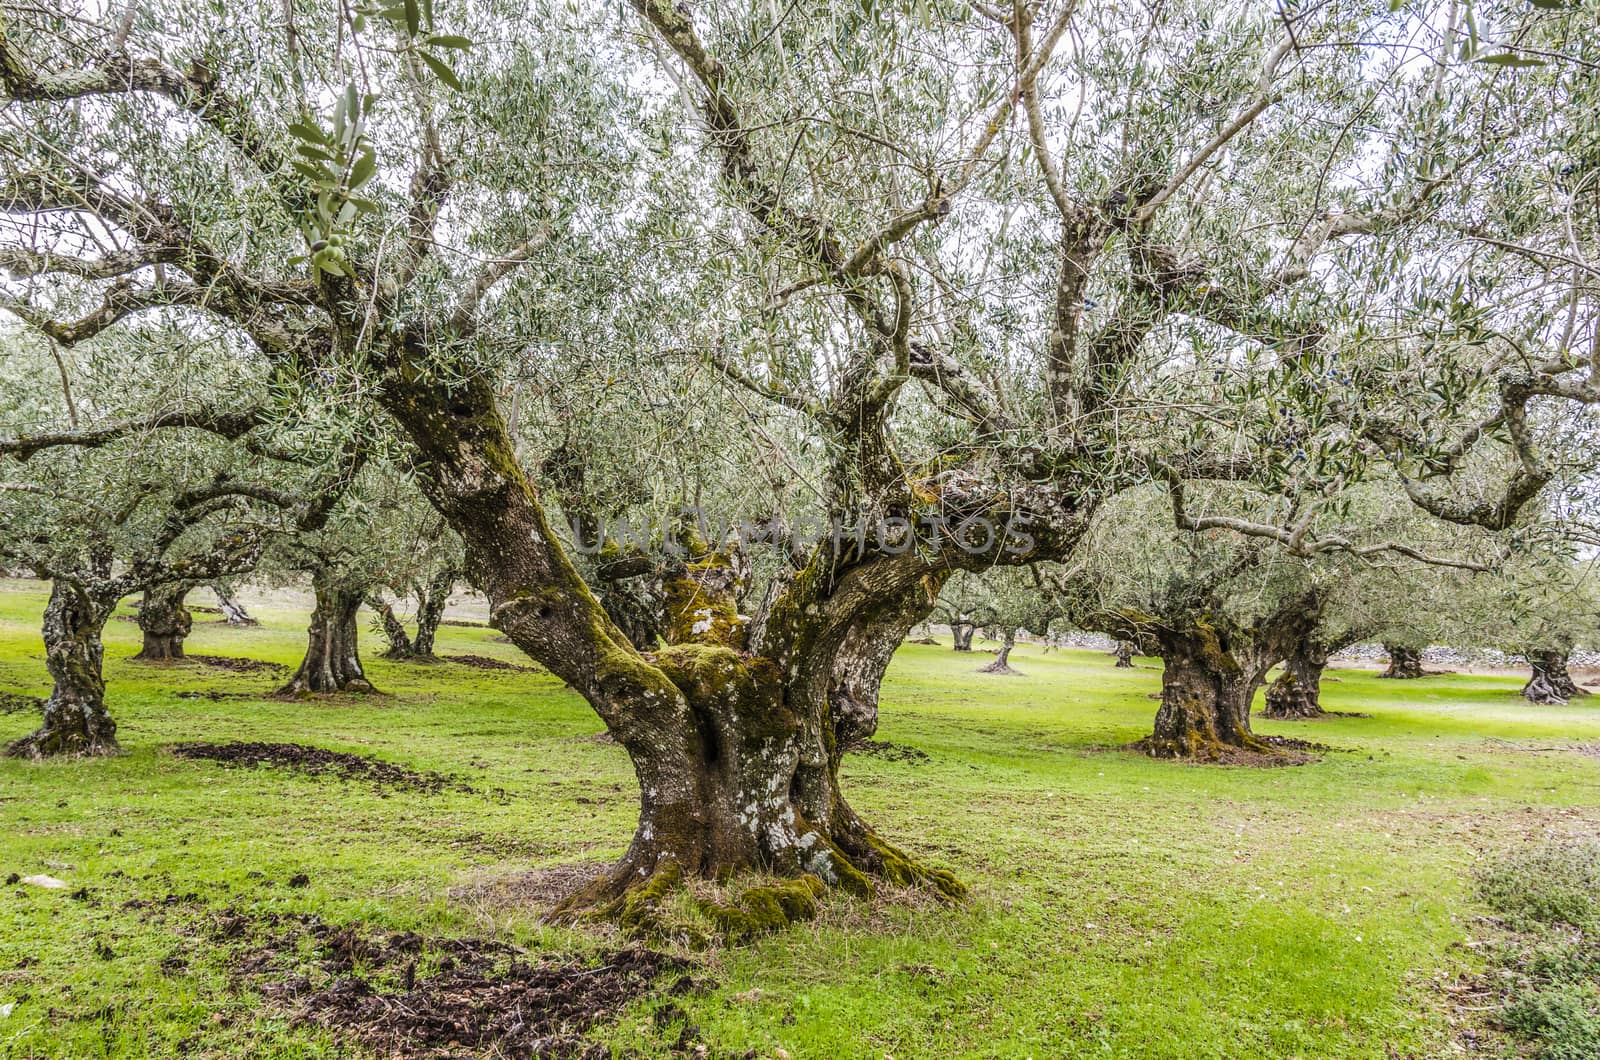 In the interior of the island of zakynthos olive plantations abound here you can see one of them